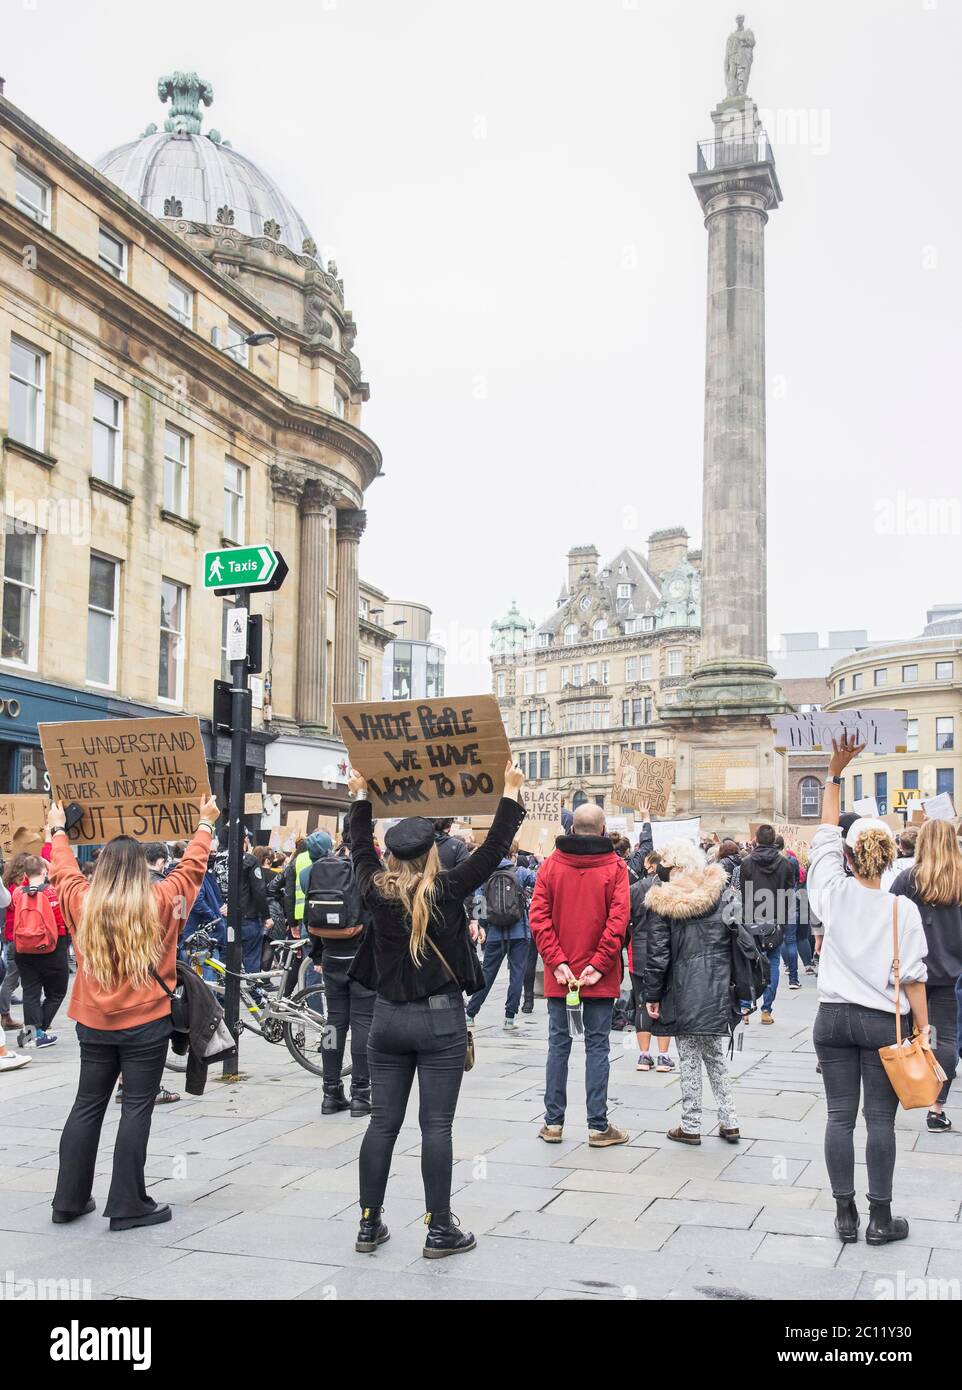 Newcastle upon Tyne, UK. 13th June 2020. Protest by international human rights movement Black Lives Matter following the death of George Floyd in Minneapolis Minnesota on 25th May 2020. Joseph Gaul/Alamy News. Stock Photo